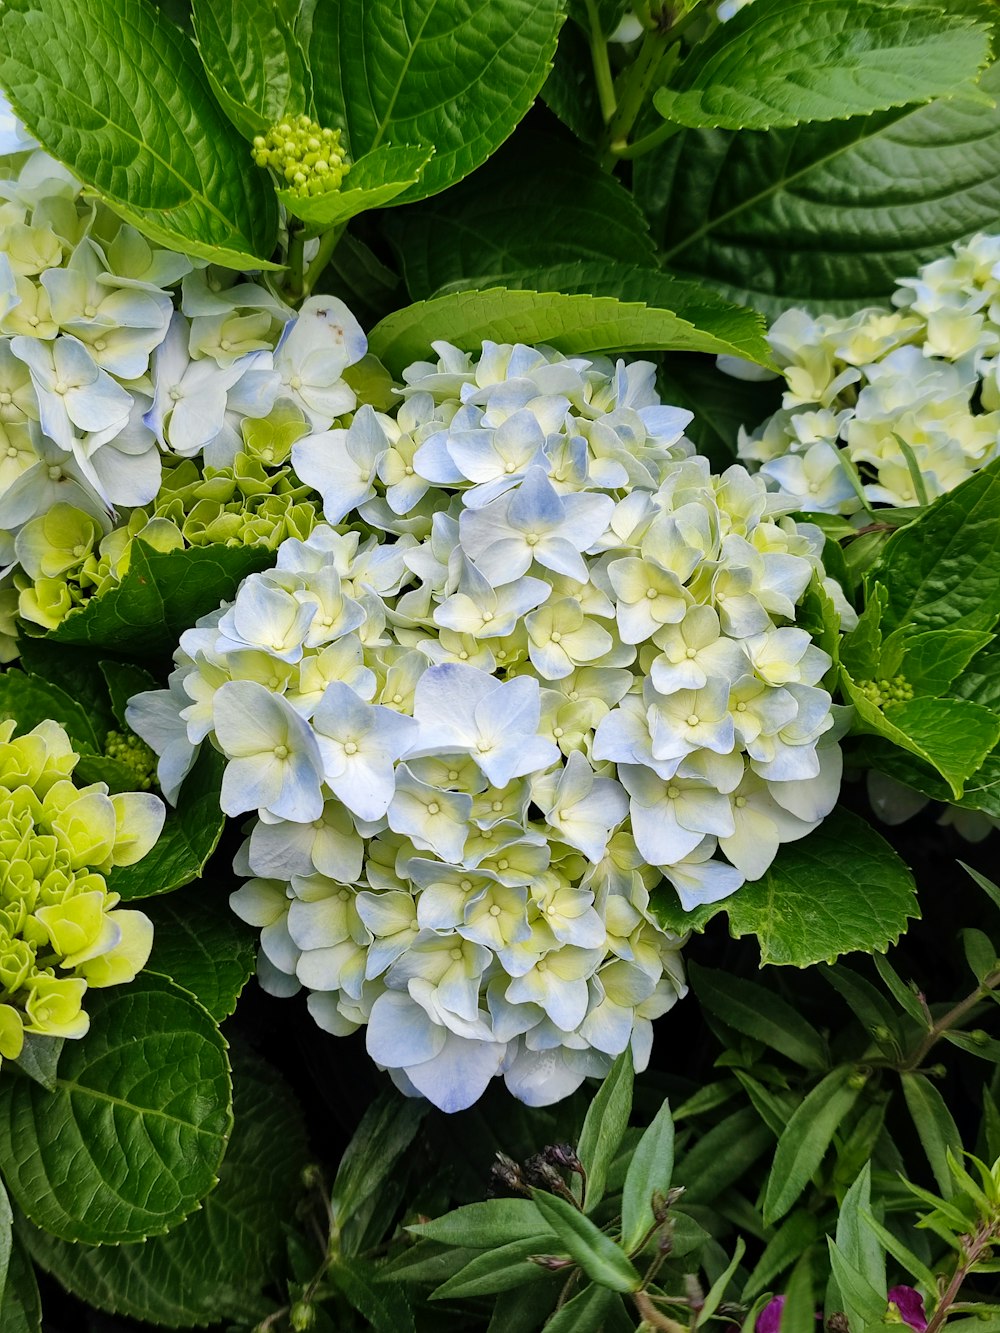 a close up of a bunch of flowers with green leaves